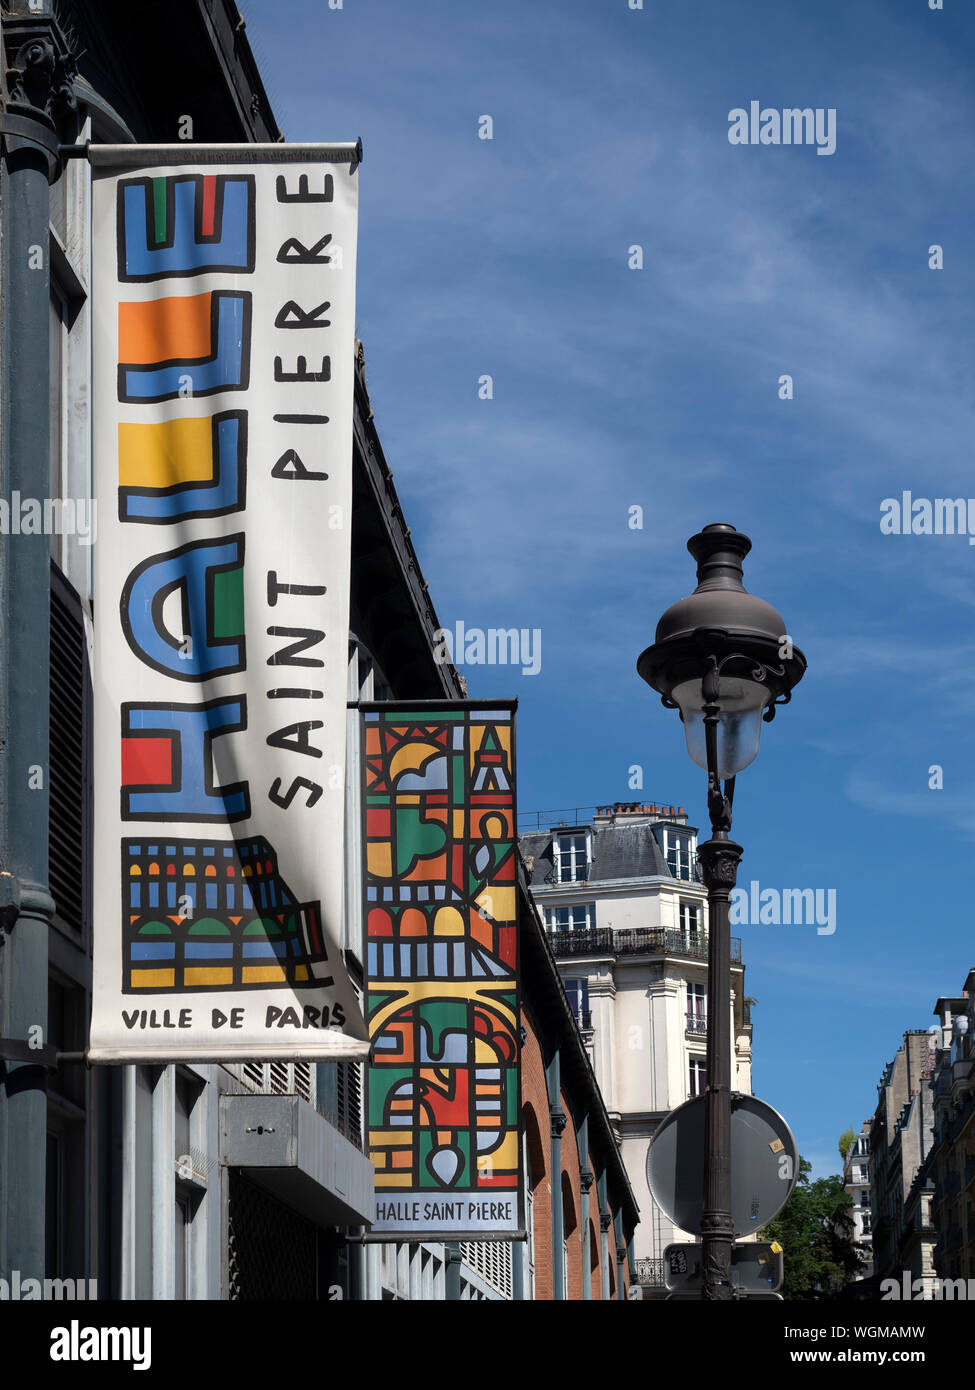 PARIS, FRANCE - AUGUST 04, 2018: Banner signs outside Halle Saint Pierre in Rue Ronsard - this building houses a museum,  gallery, bookshop, auditoriu Stock Photo